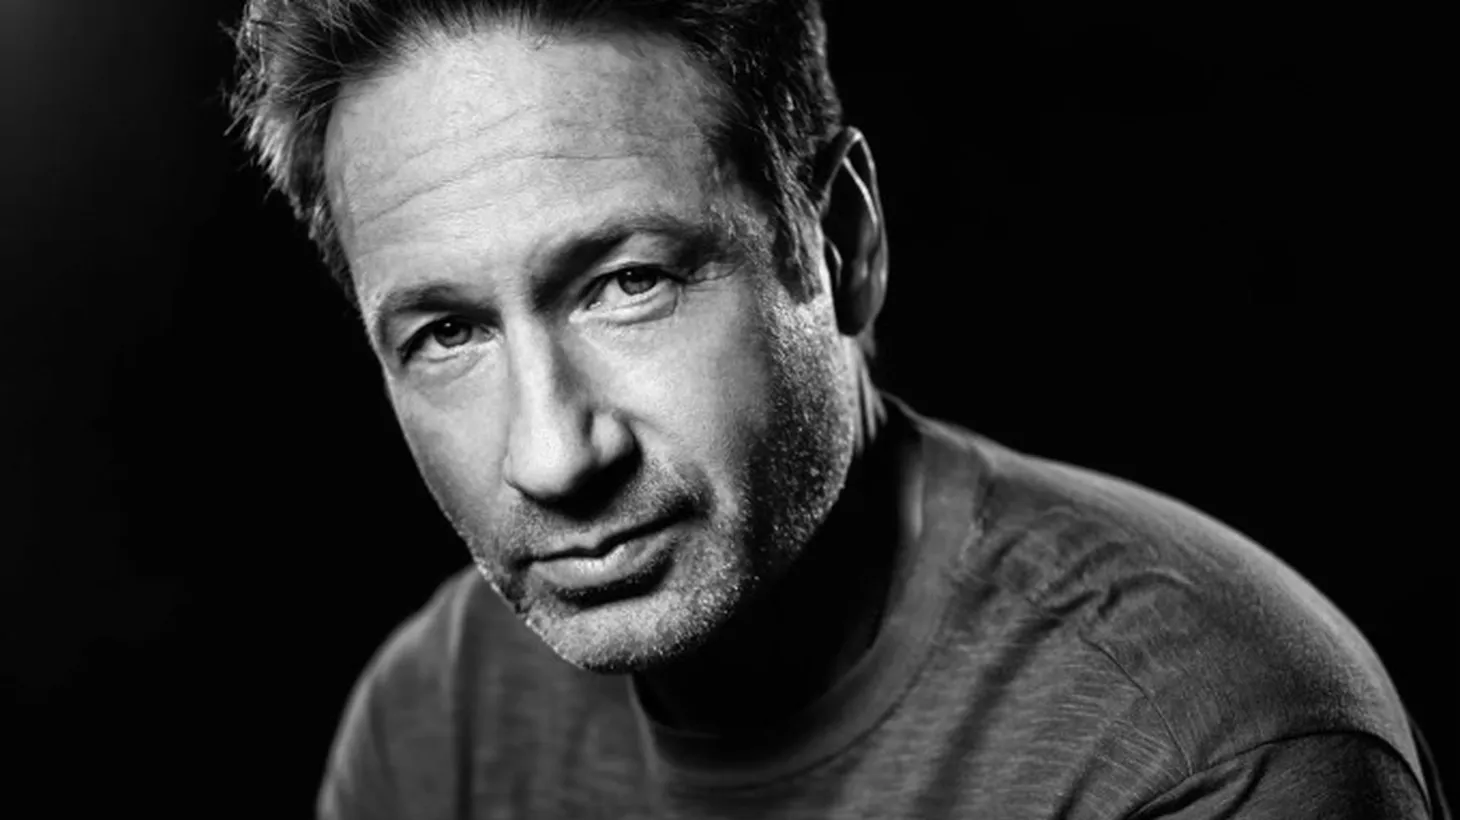 “If ‘The Reservoir’ is me entering into a world of Thomas Mann or Borges or Hawthorne, which are the stories that are referenced in the afterword, that's not childhood, but that's my education. They started the conversation with me when I was in high school and I'm responding,” says David Duchovny.